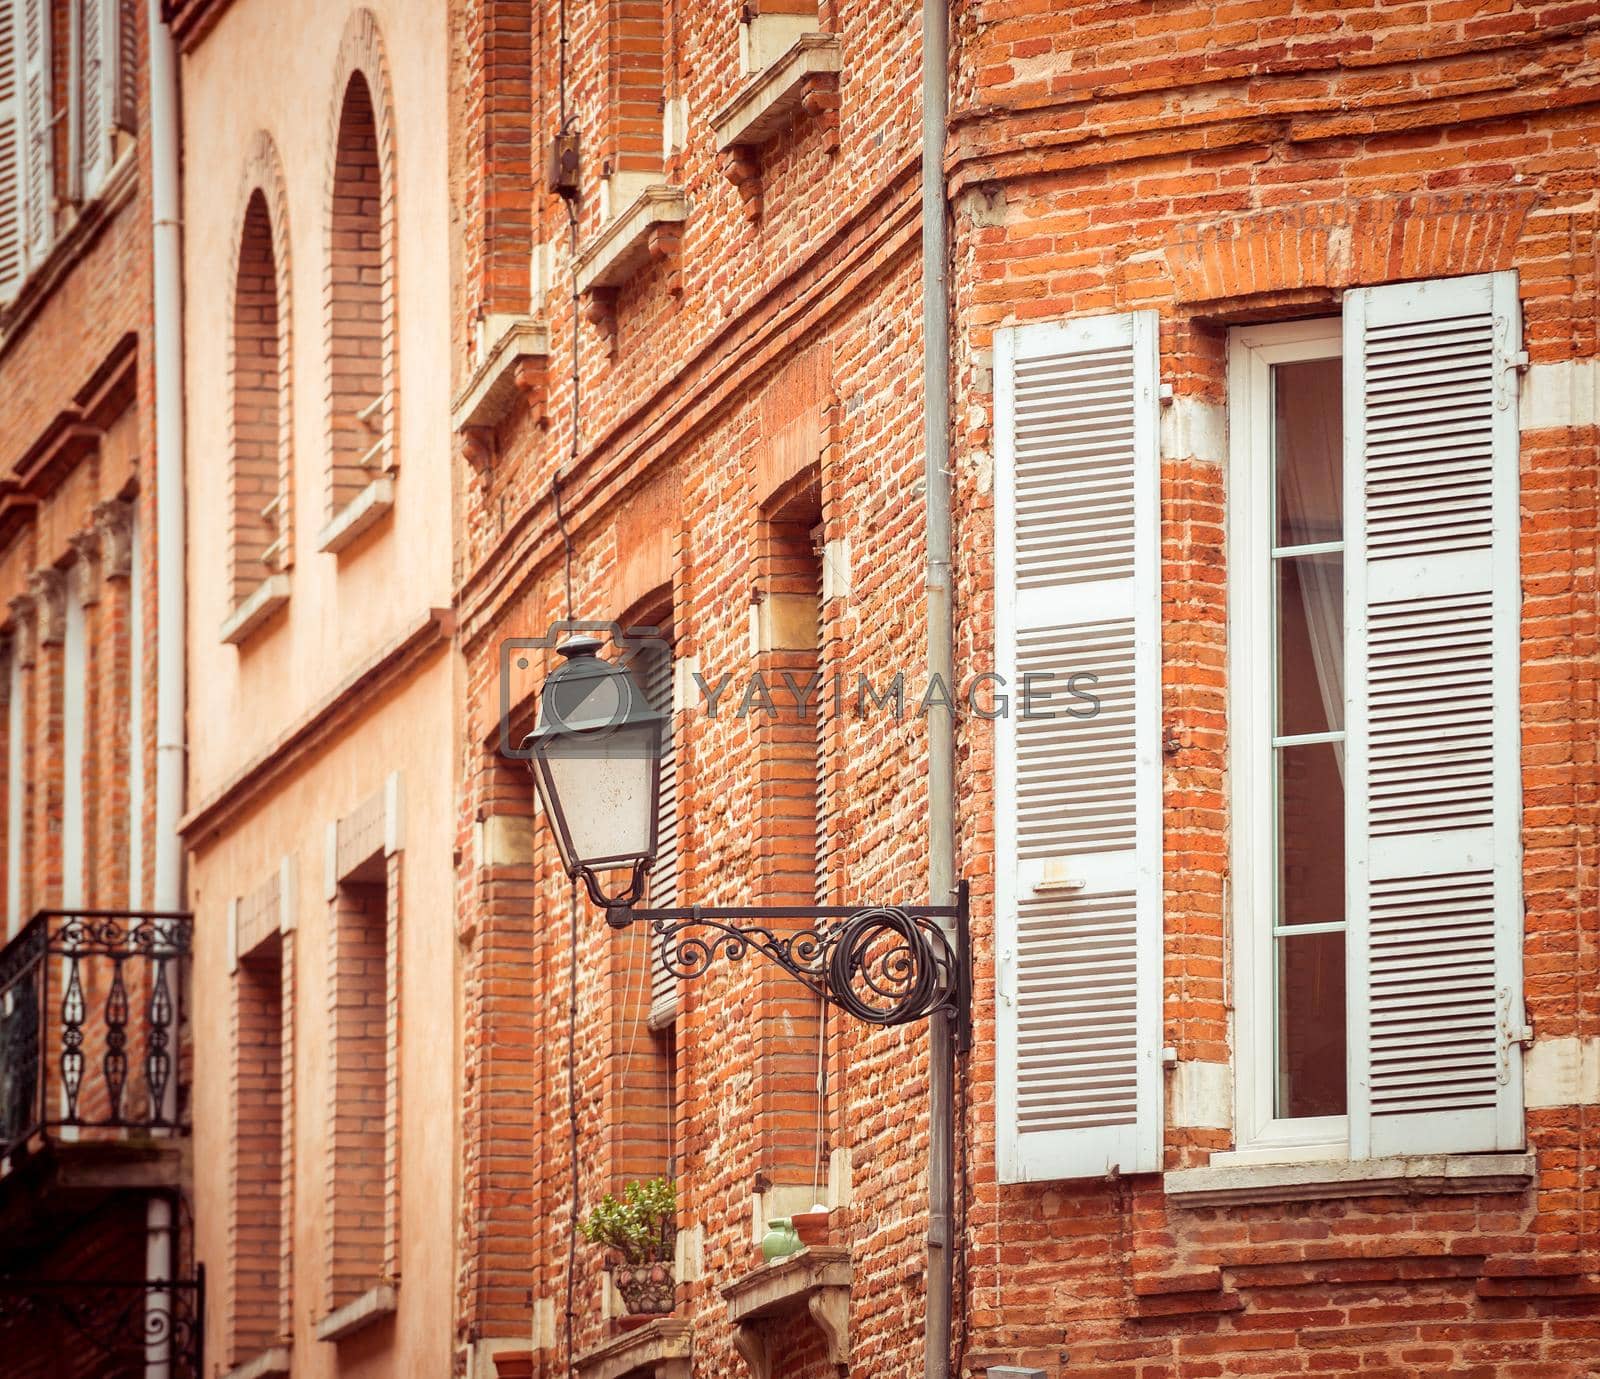 Royalty free image of street with old buildings in Toulouse by tan4ikk1